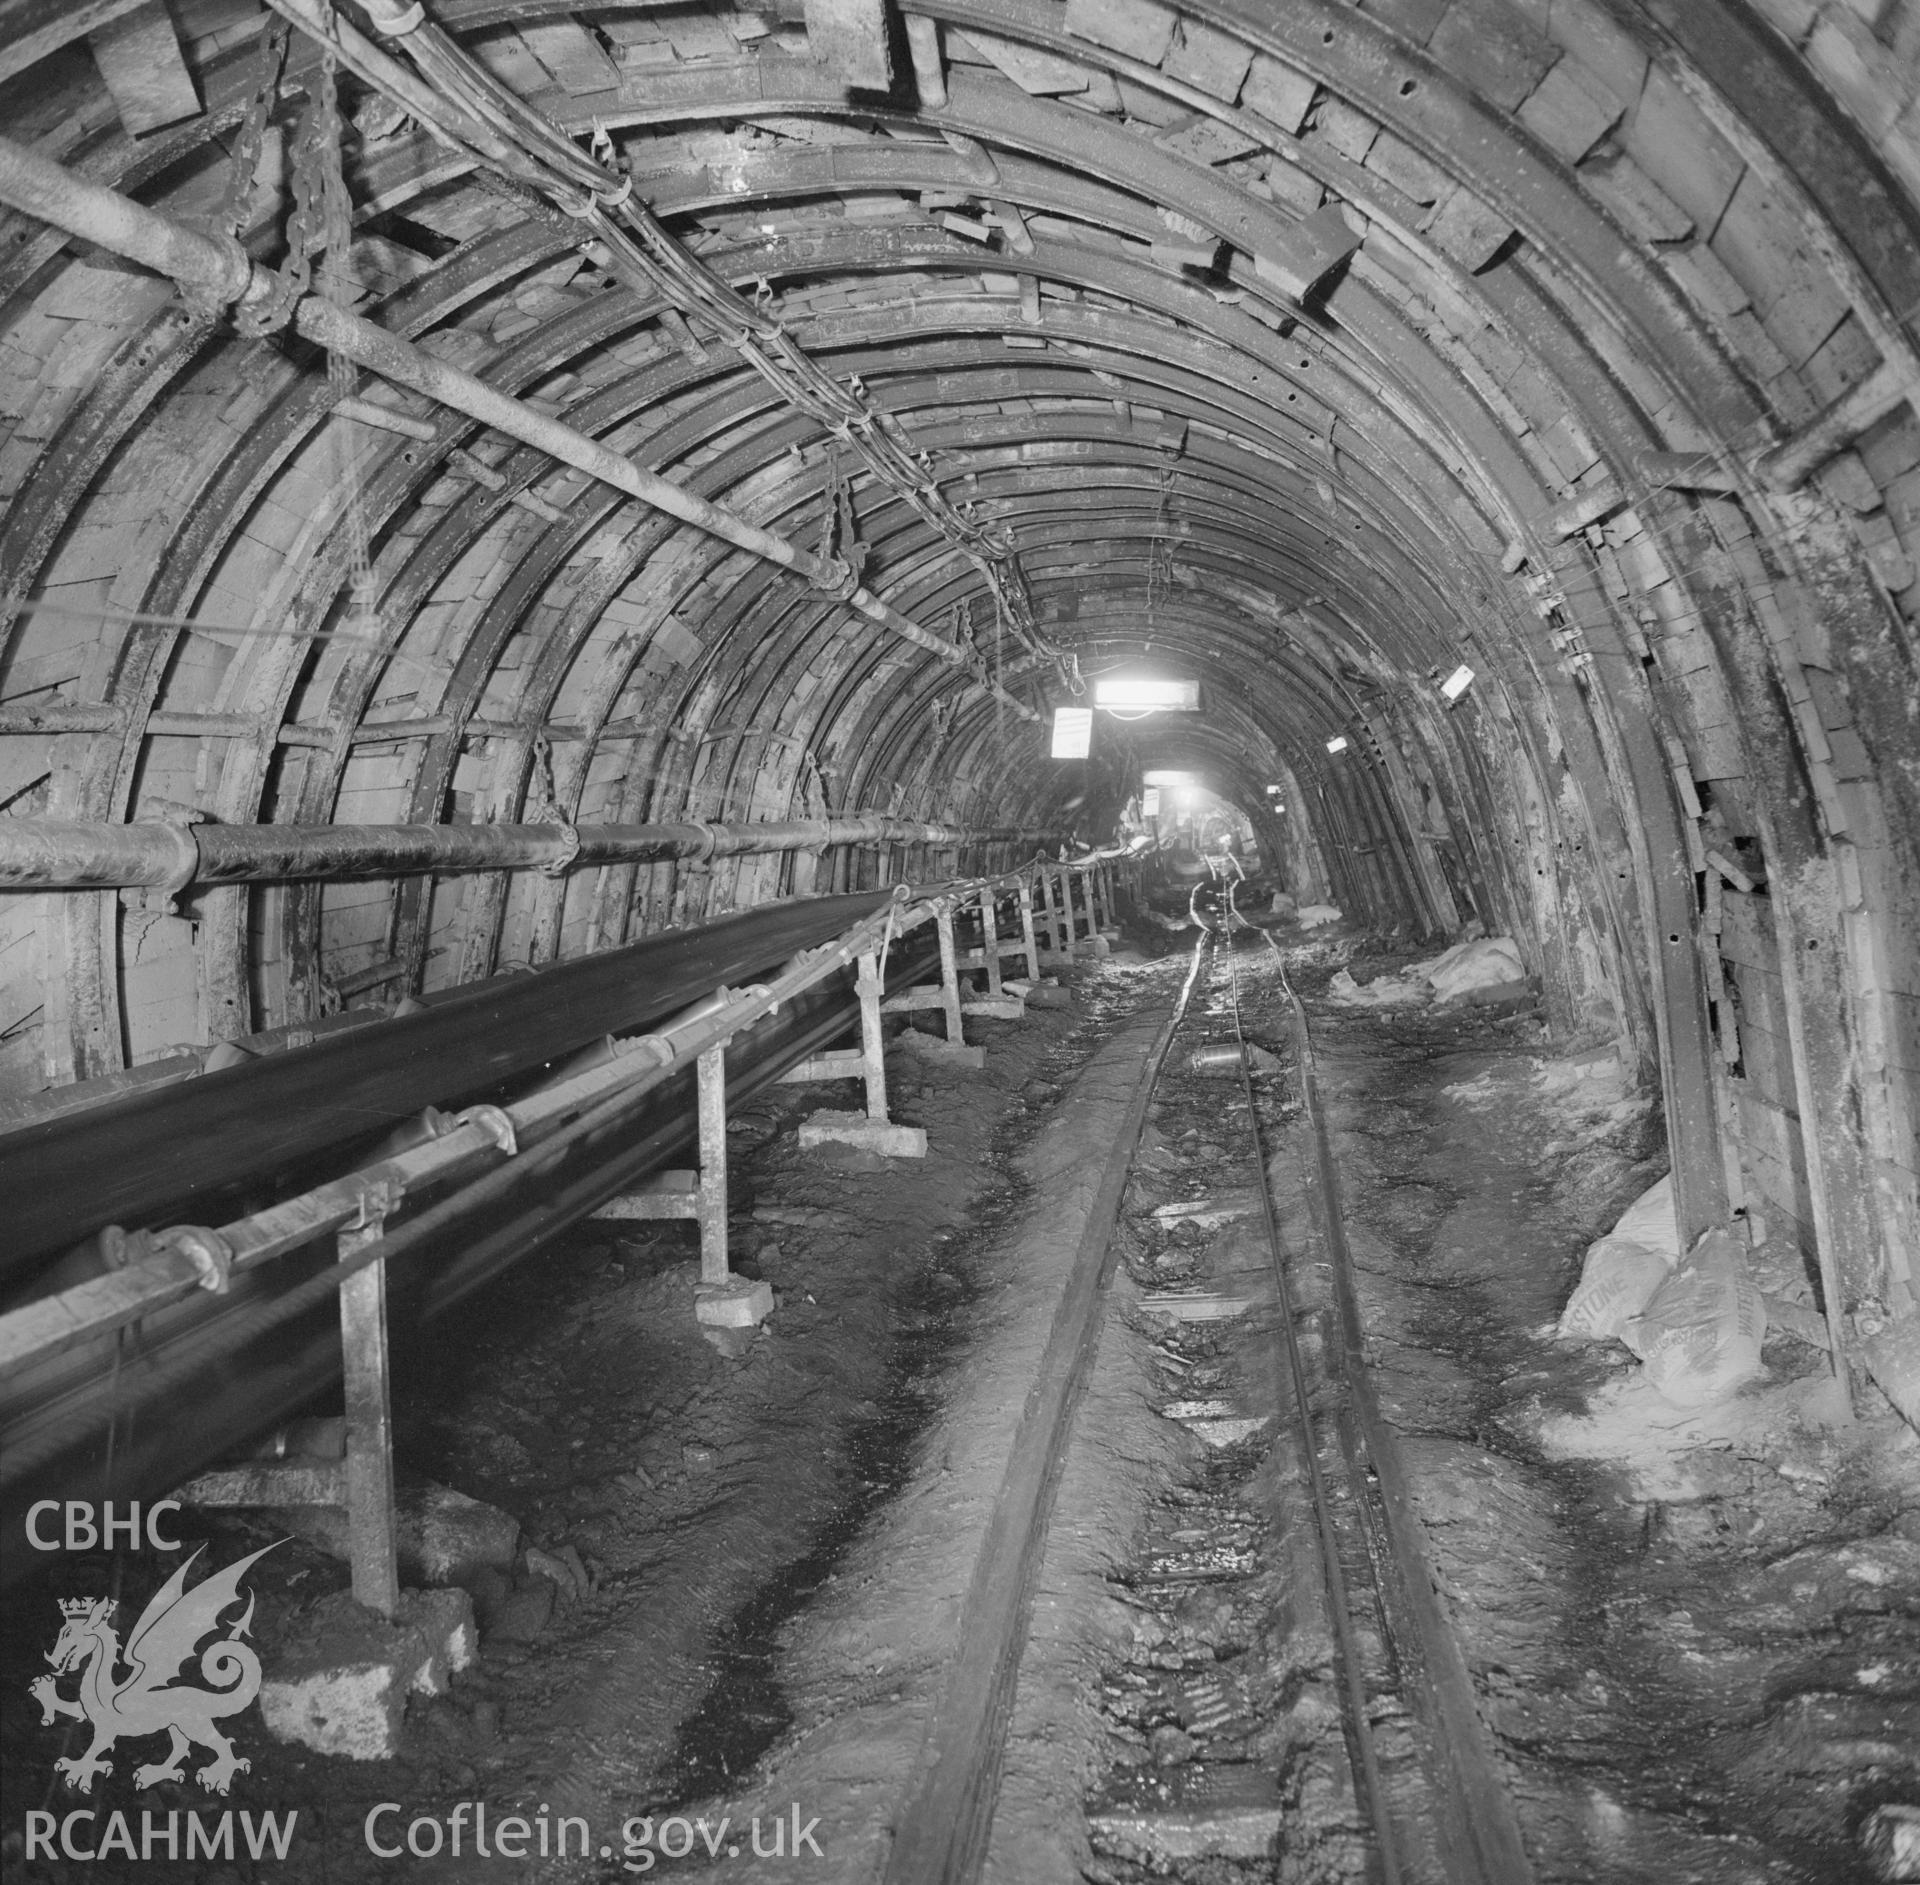 Digital copy of an acetate negative showing "Trunk road with conveyor looking outbye, New Mine", Big Pit, from the John Cornwell Collection.